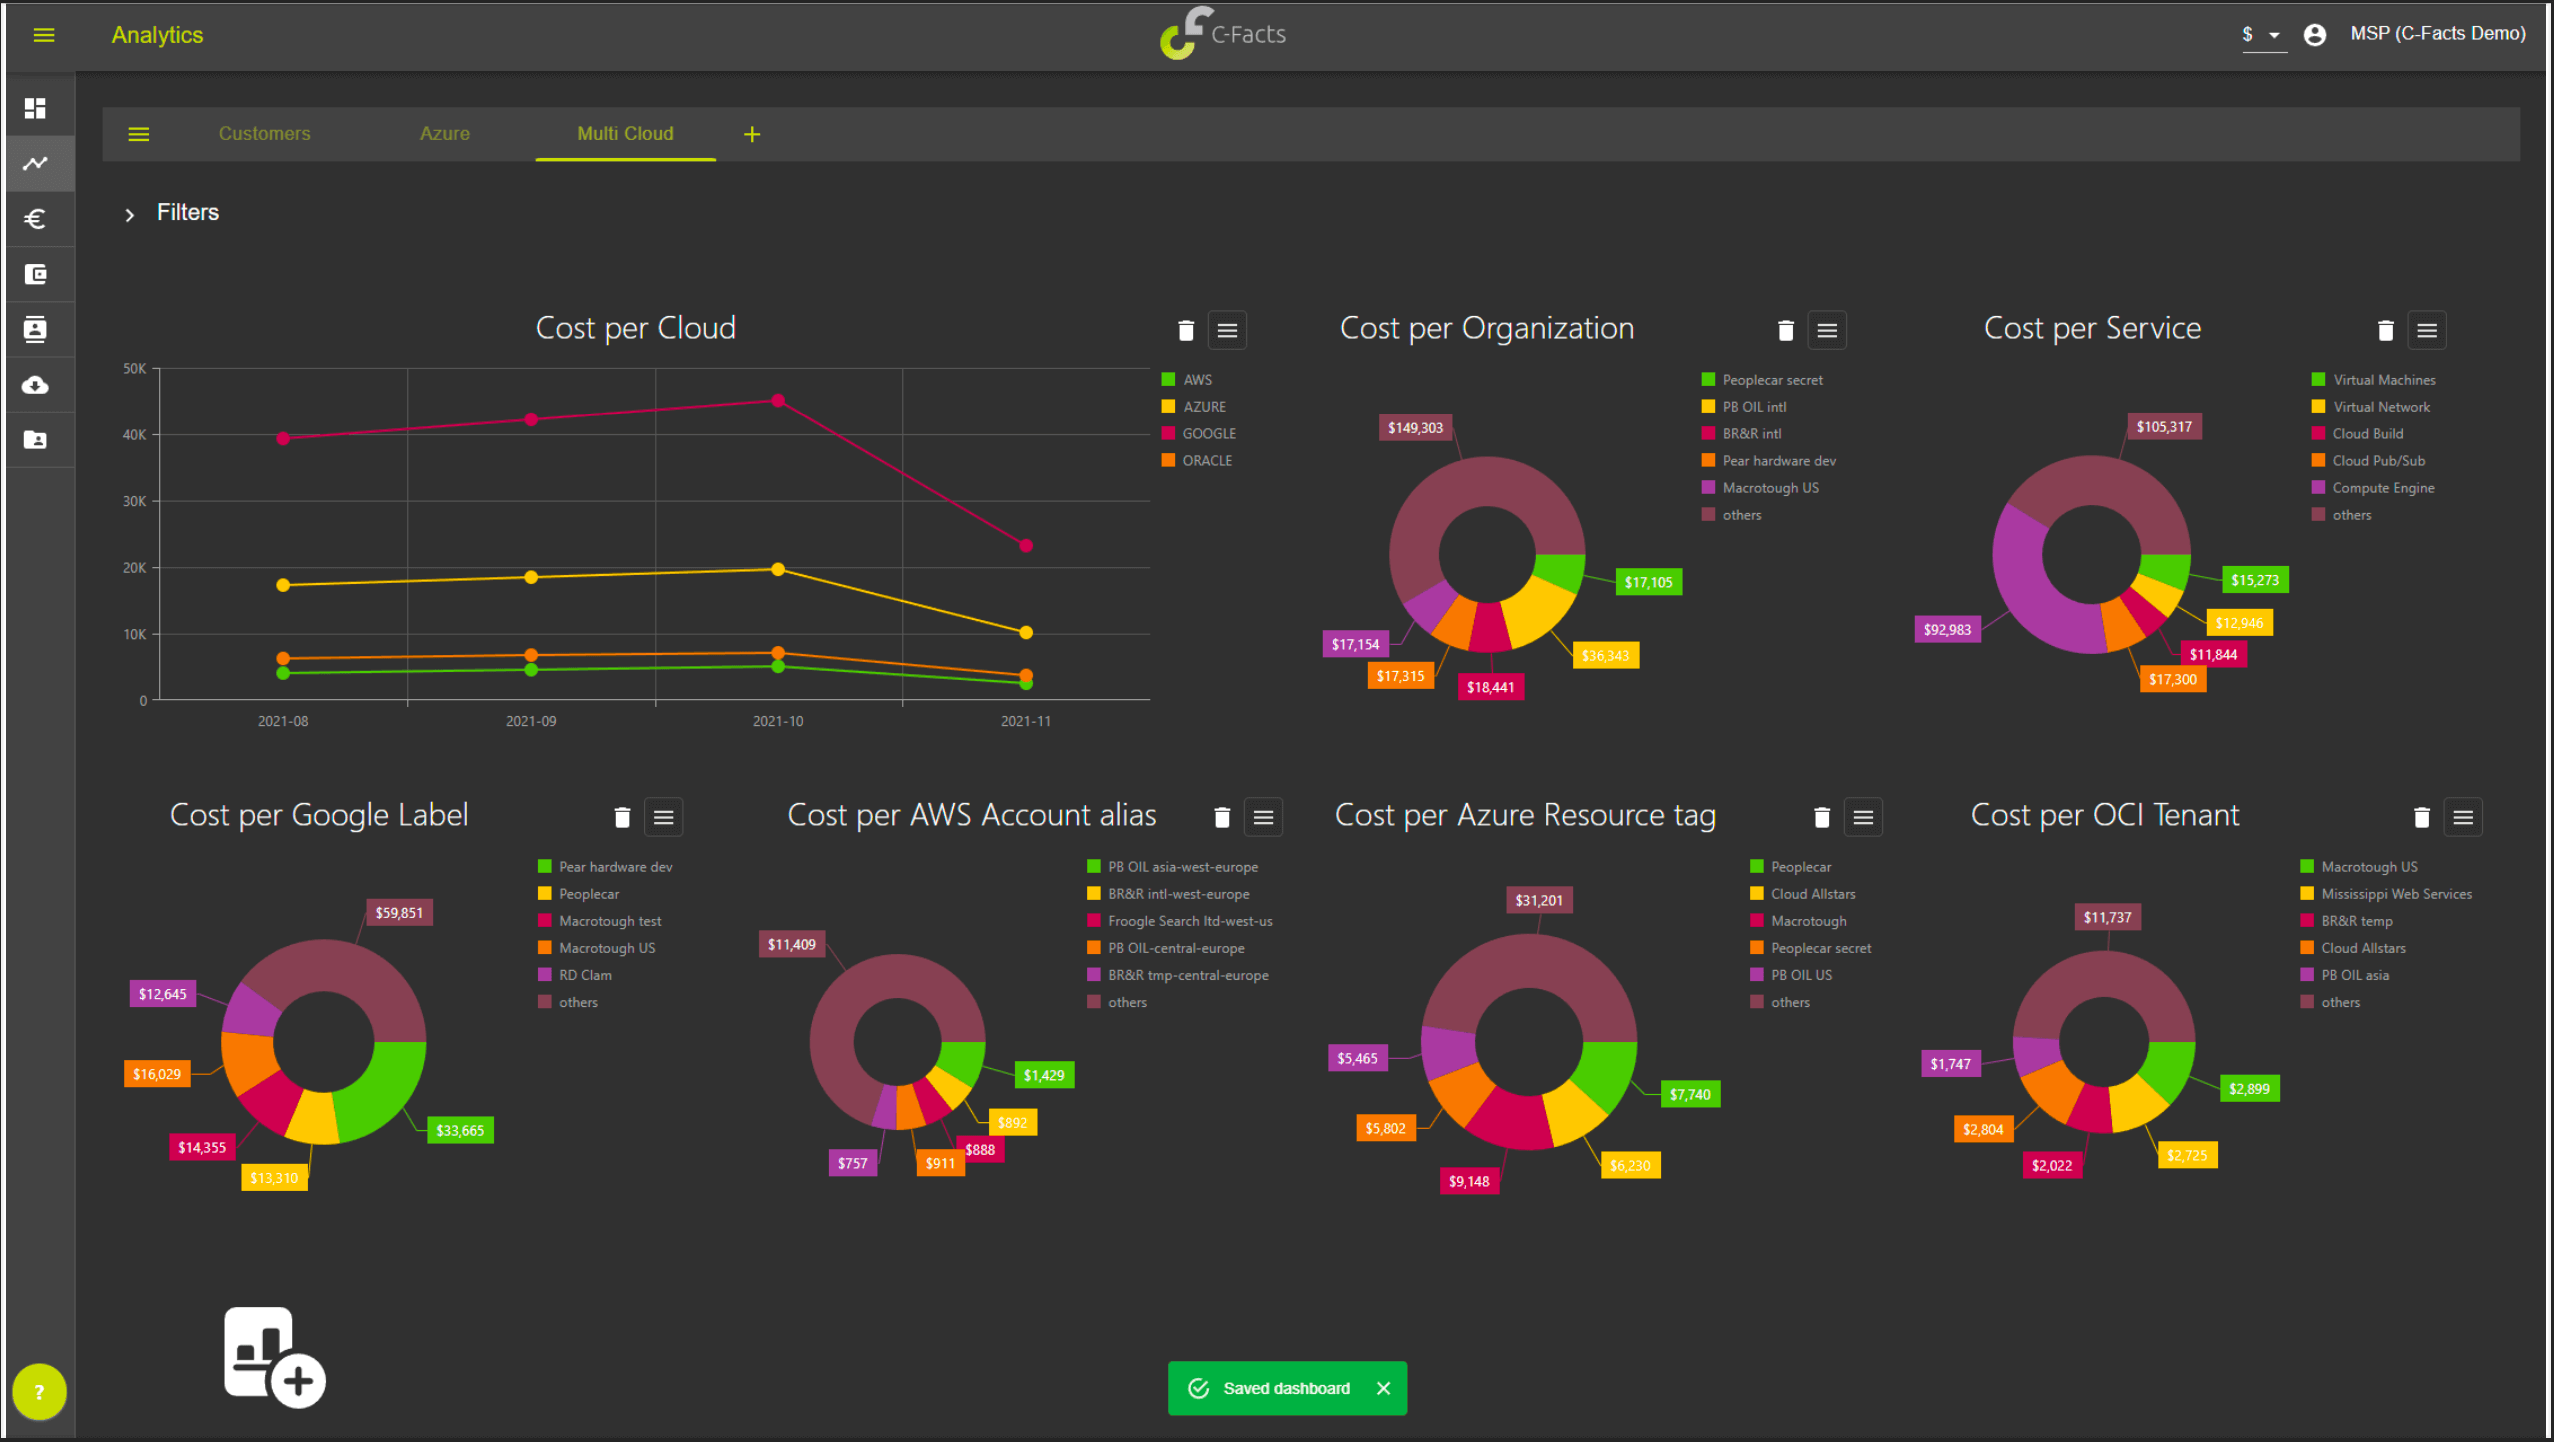 Dashboard of C-Facts FinOps tool